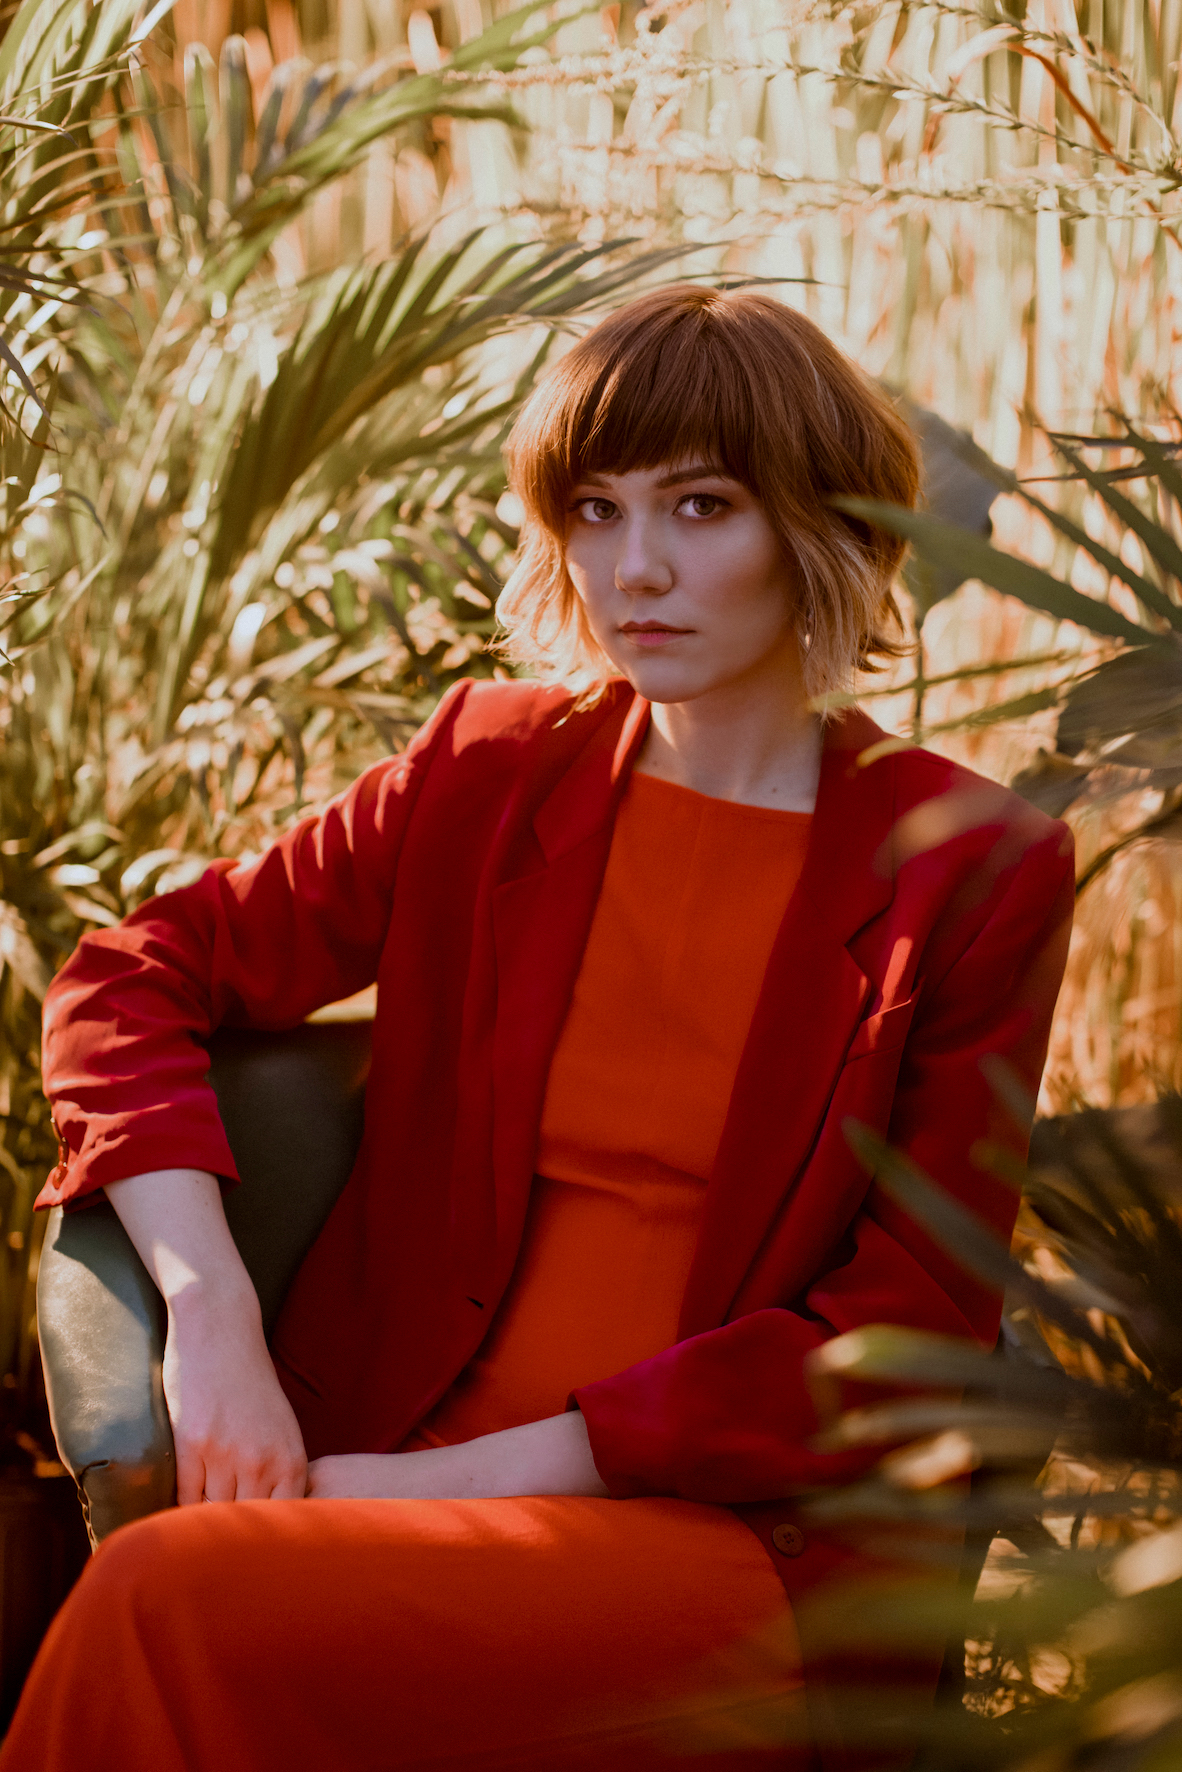 Molly Tuttle confirmed for Take Root Festival and Paradiso show